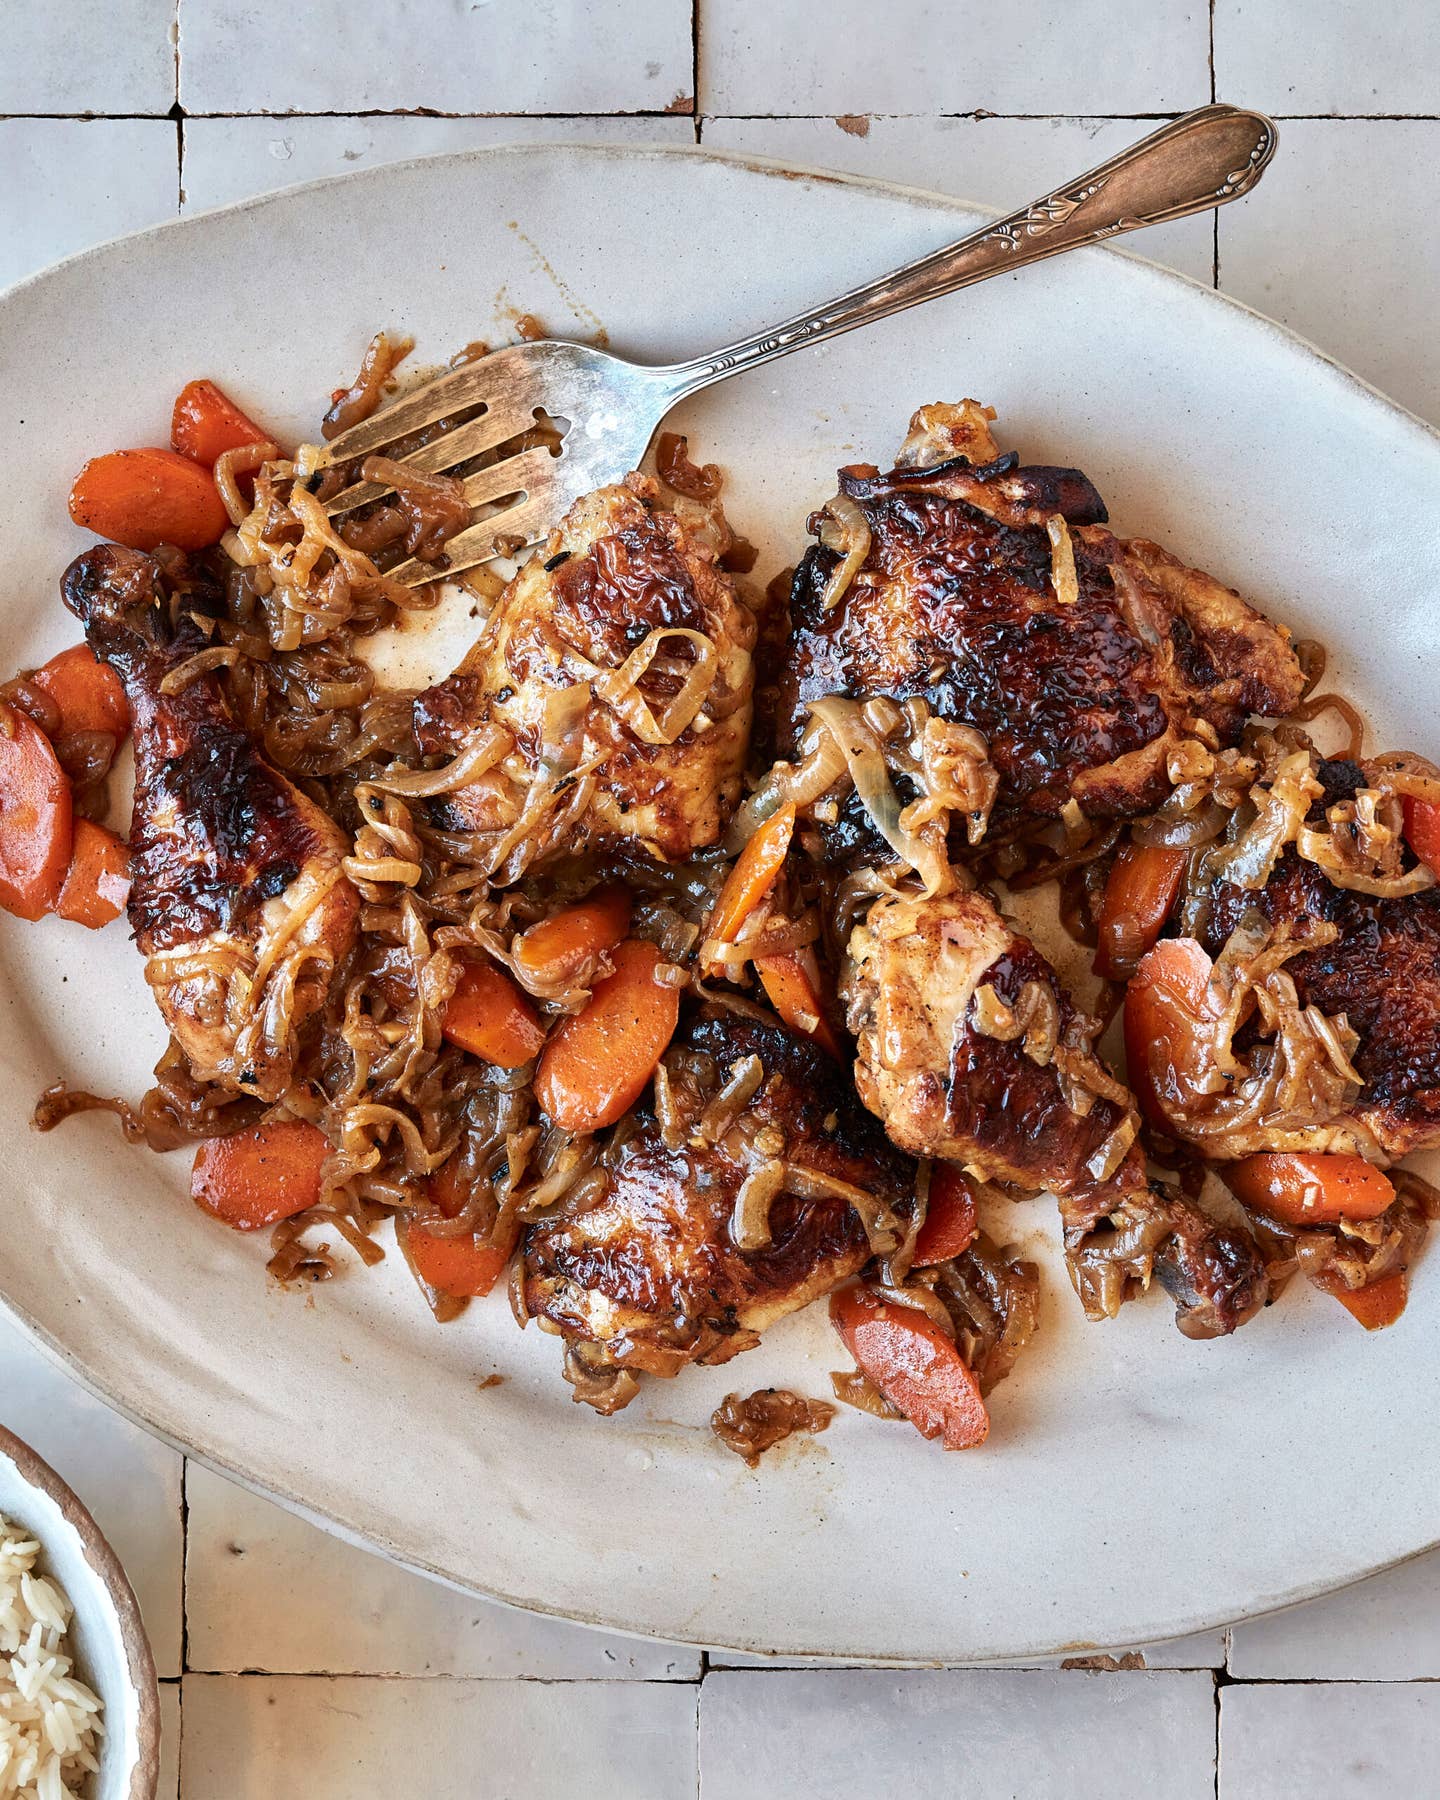 Senegalese style grilled chicken recipe with caramelized onions.